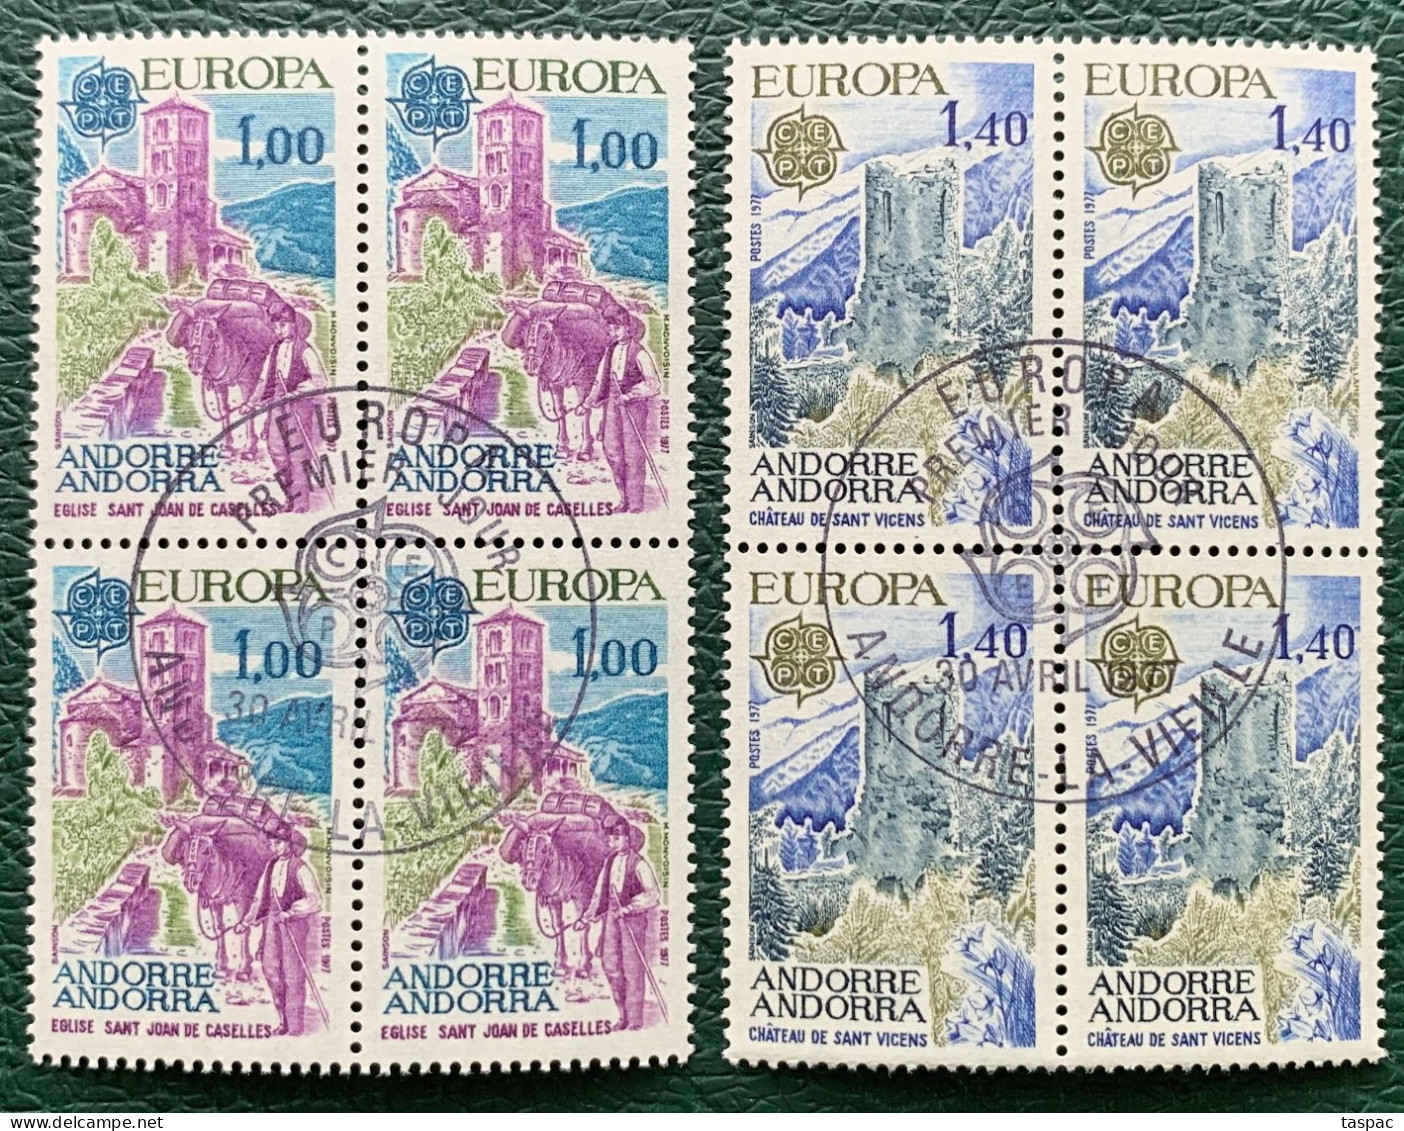 French Andorra 1977 Mi# 282-283 Used - Set In Bloks Of 4 - Europa / Landscapes - 1977